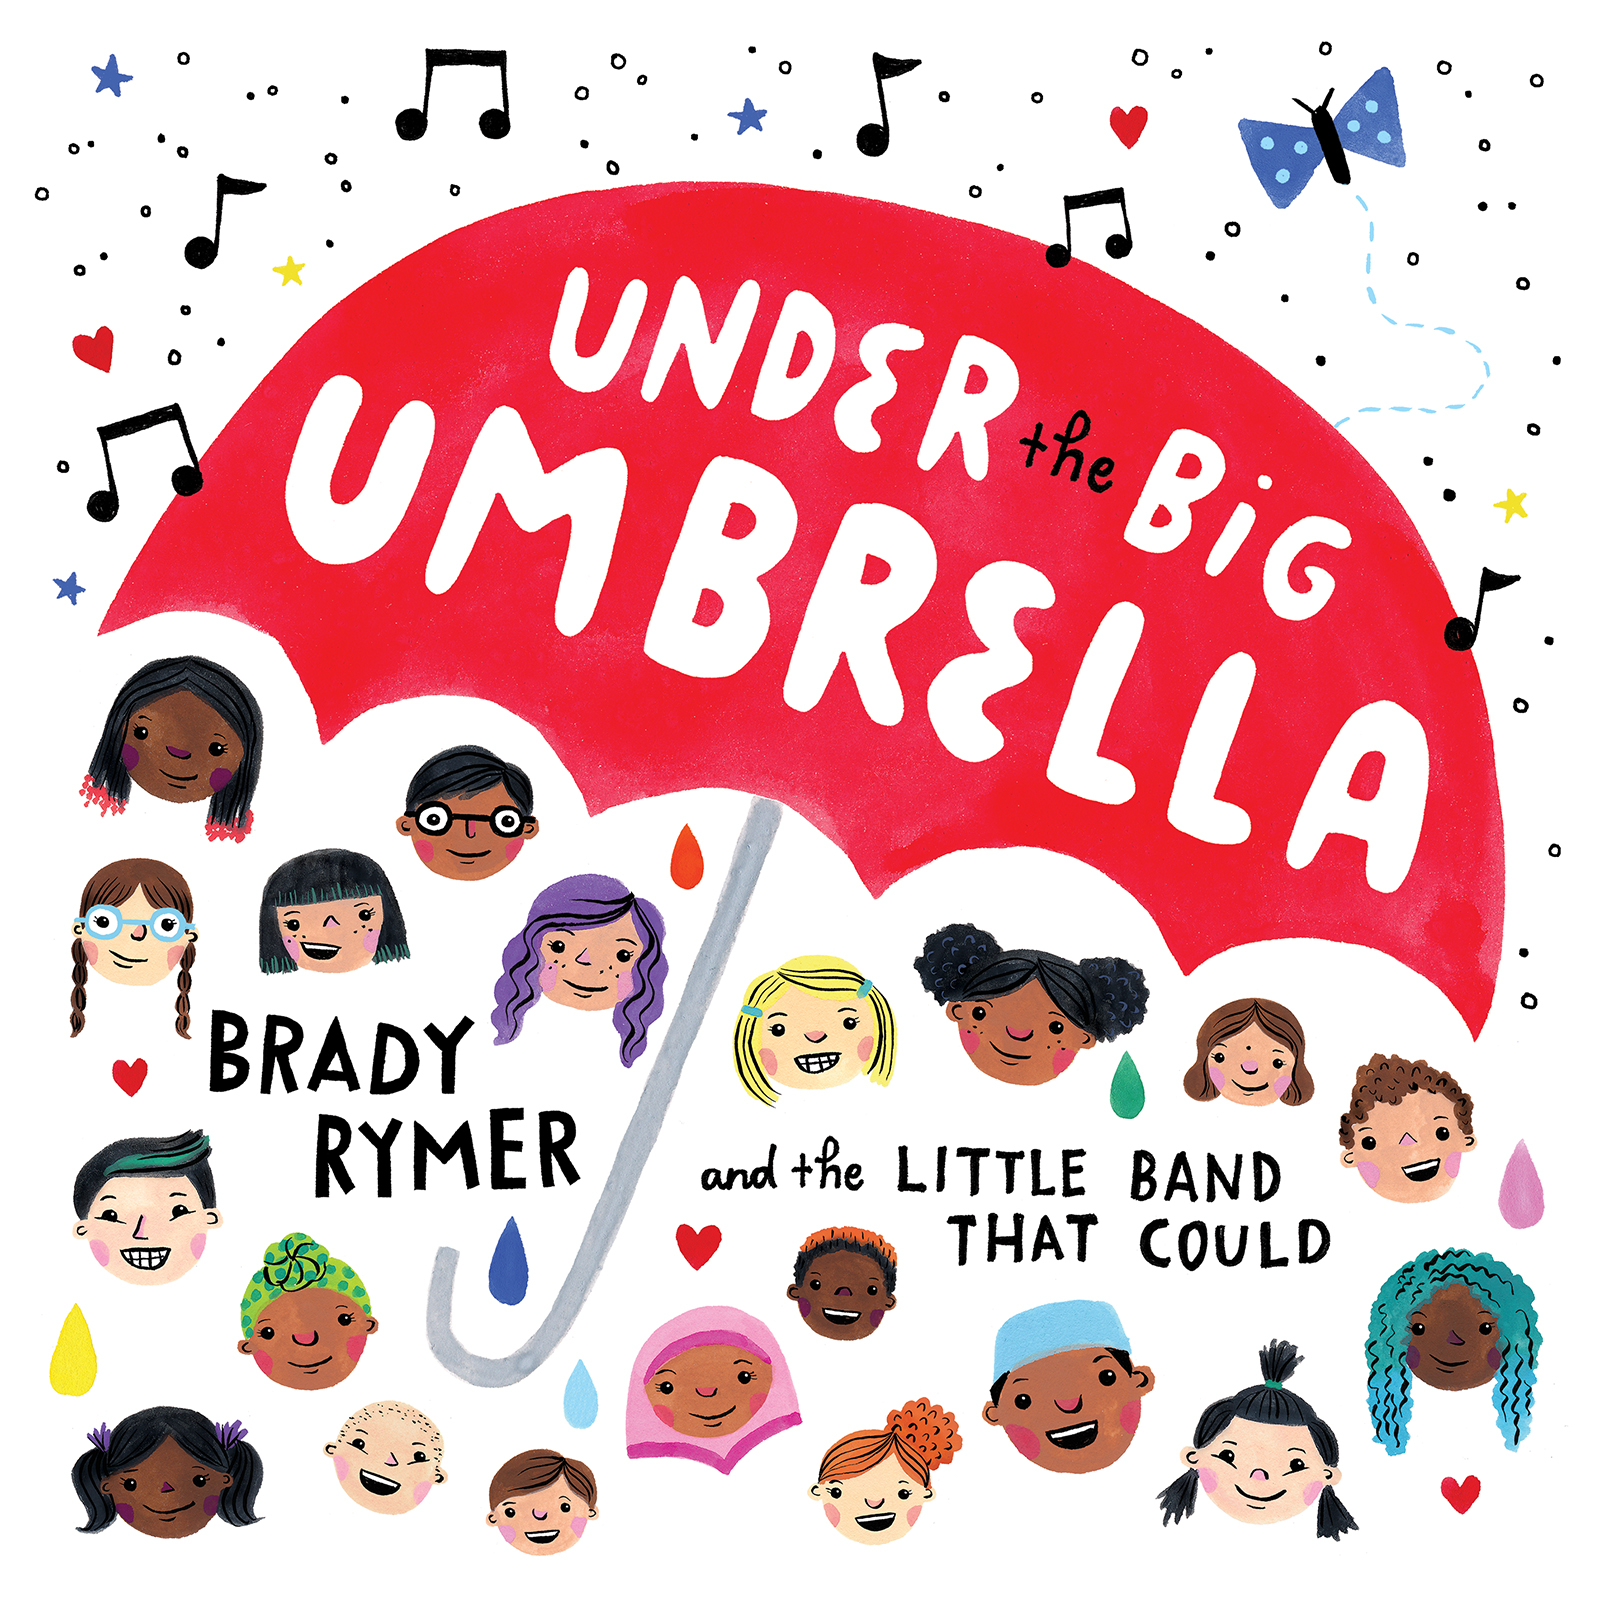 Under the Big Umbrella by Brady Rymer and the Little Band that Could